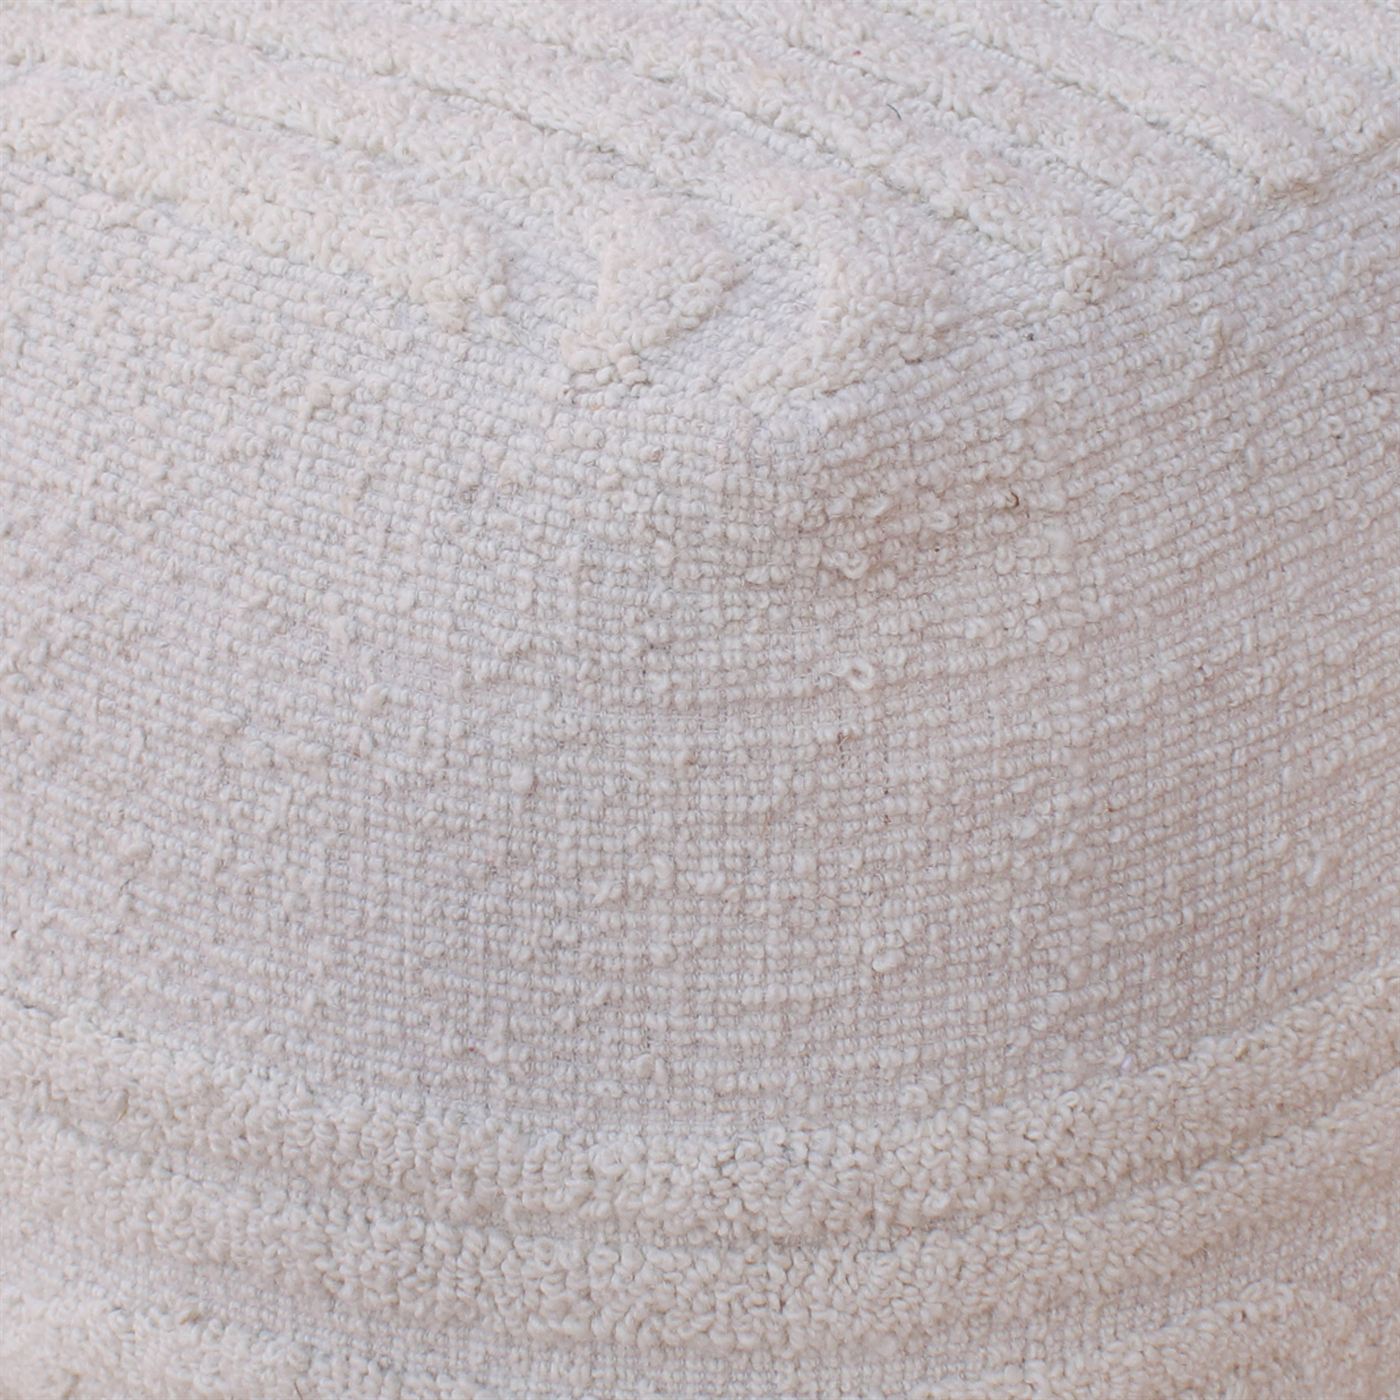 Debren Pouf, Wool, Natural White, Hand woven, All Loop